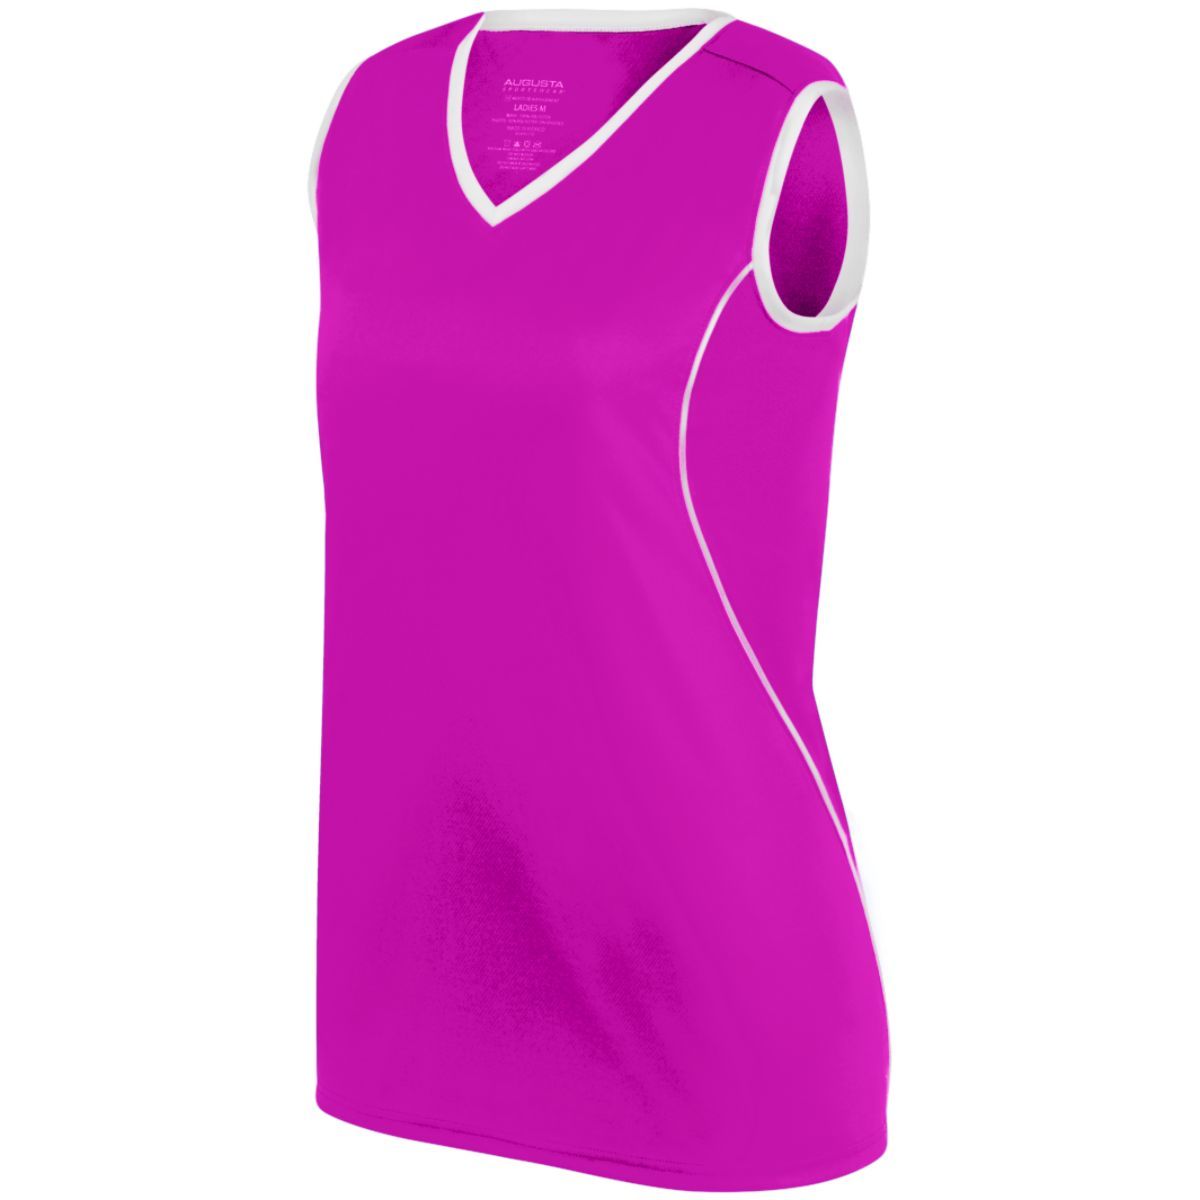 Augusta Sportswear Ladies Firebolt Jersey in Power Pink/White  -Part of the Ladies, Ladies-Jersey, Augusta-Products, Softball, Shirts product lines at KanaleyCreations.com